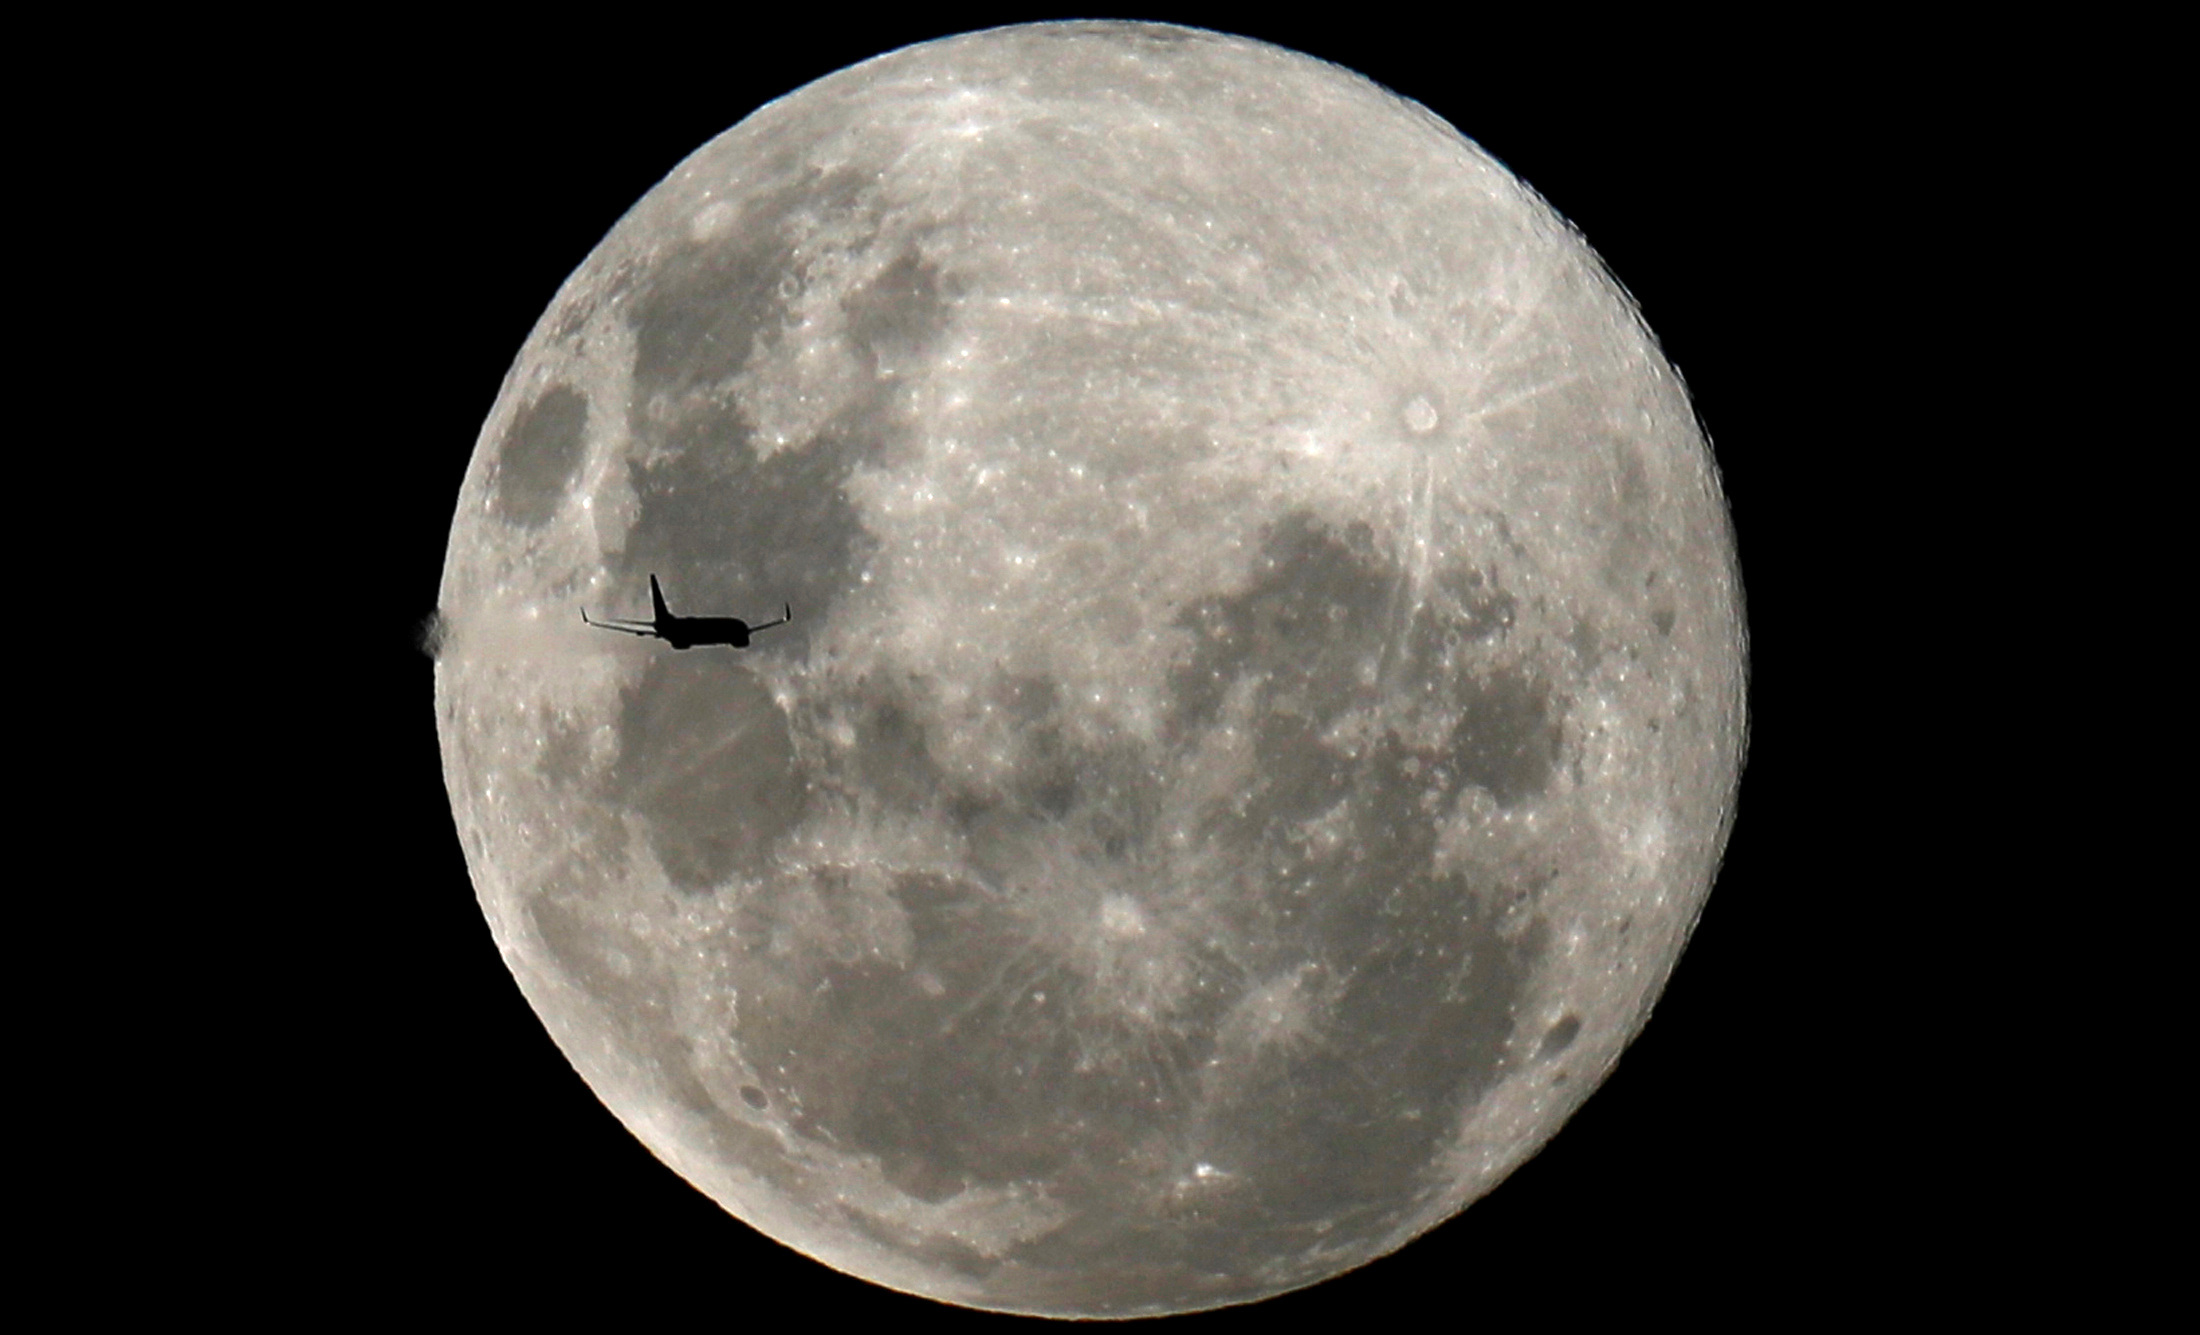 A plane is pictured in front of the full moon in Curitiba